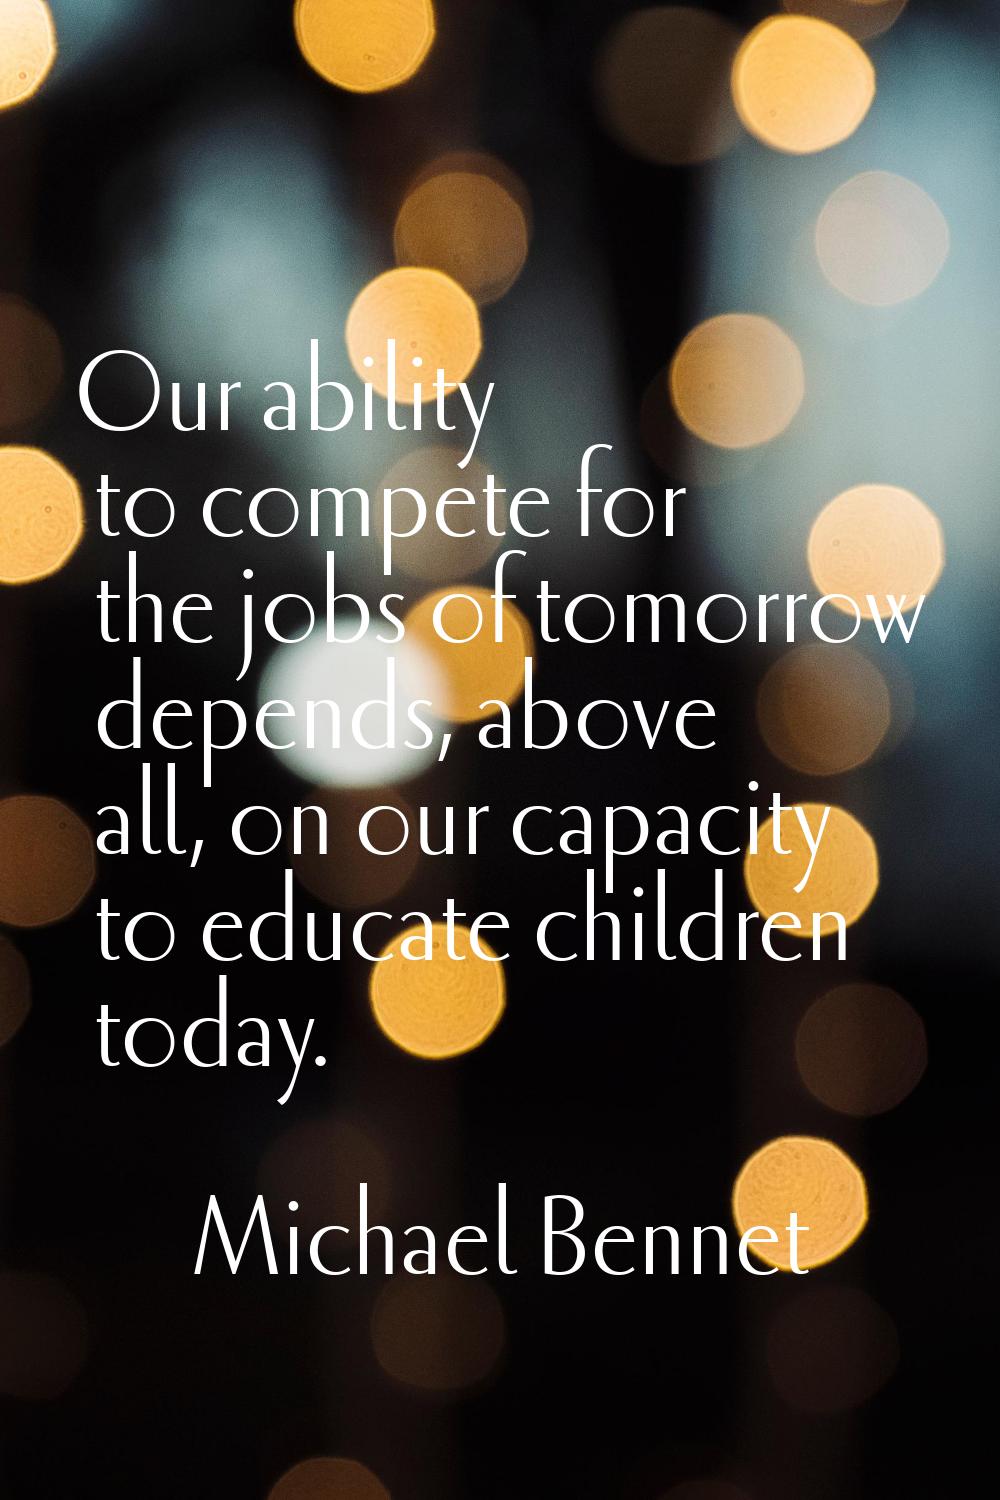 Our ability to compete for the jobs of tomorrow depends, above all, on our capacity to educate chil